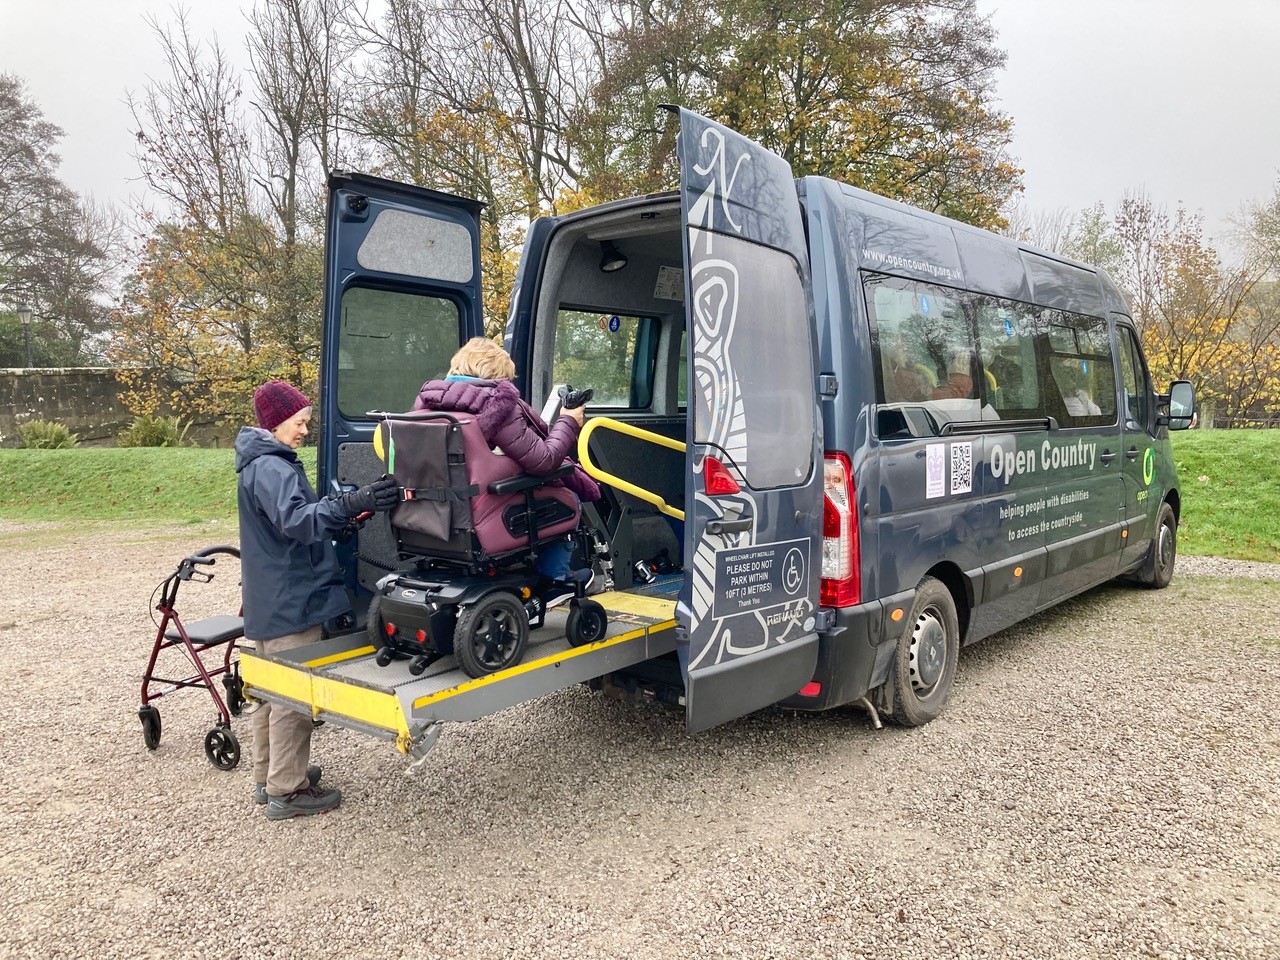 A woman in a wheelchair getting off a minibus on the rear lift